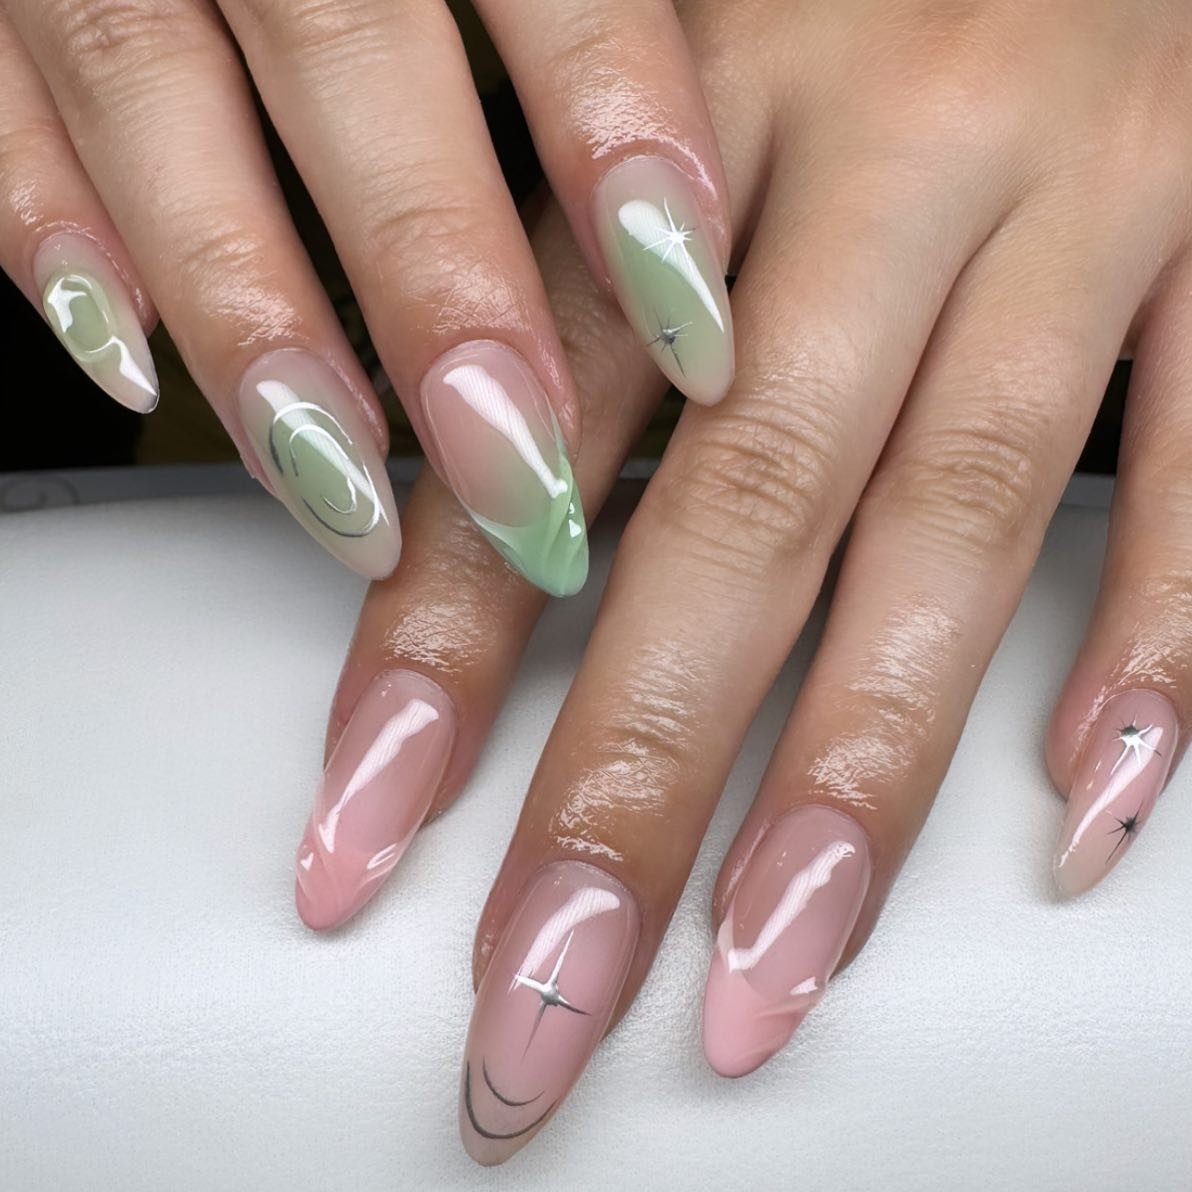 3 - Picture of Almond Nails